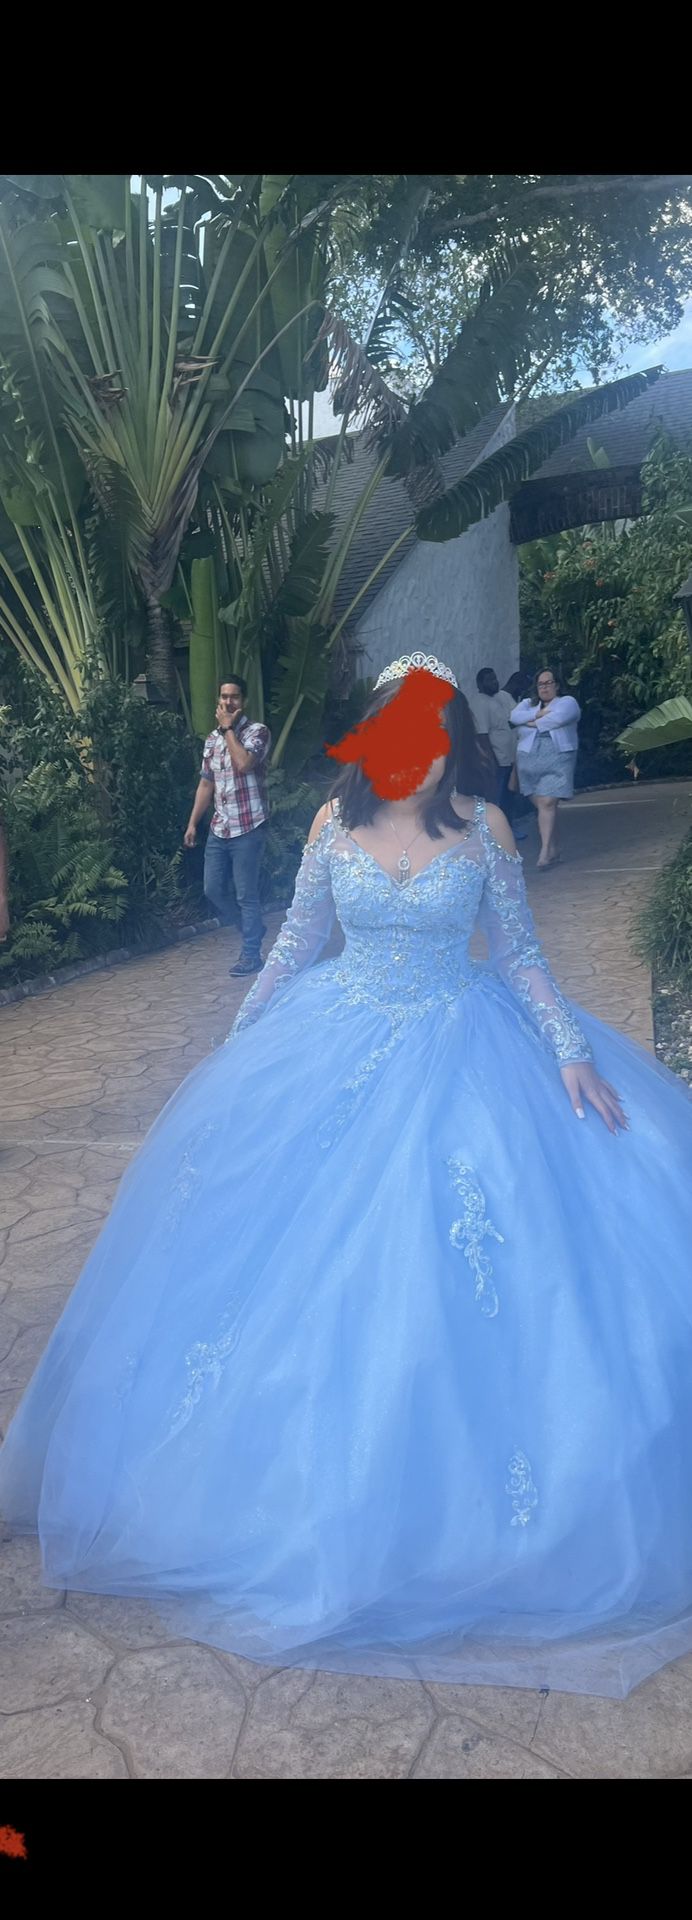 Quinceañera Beautiful Blu Dress , Like New We Only Use For Photos 